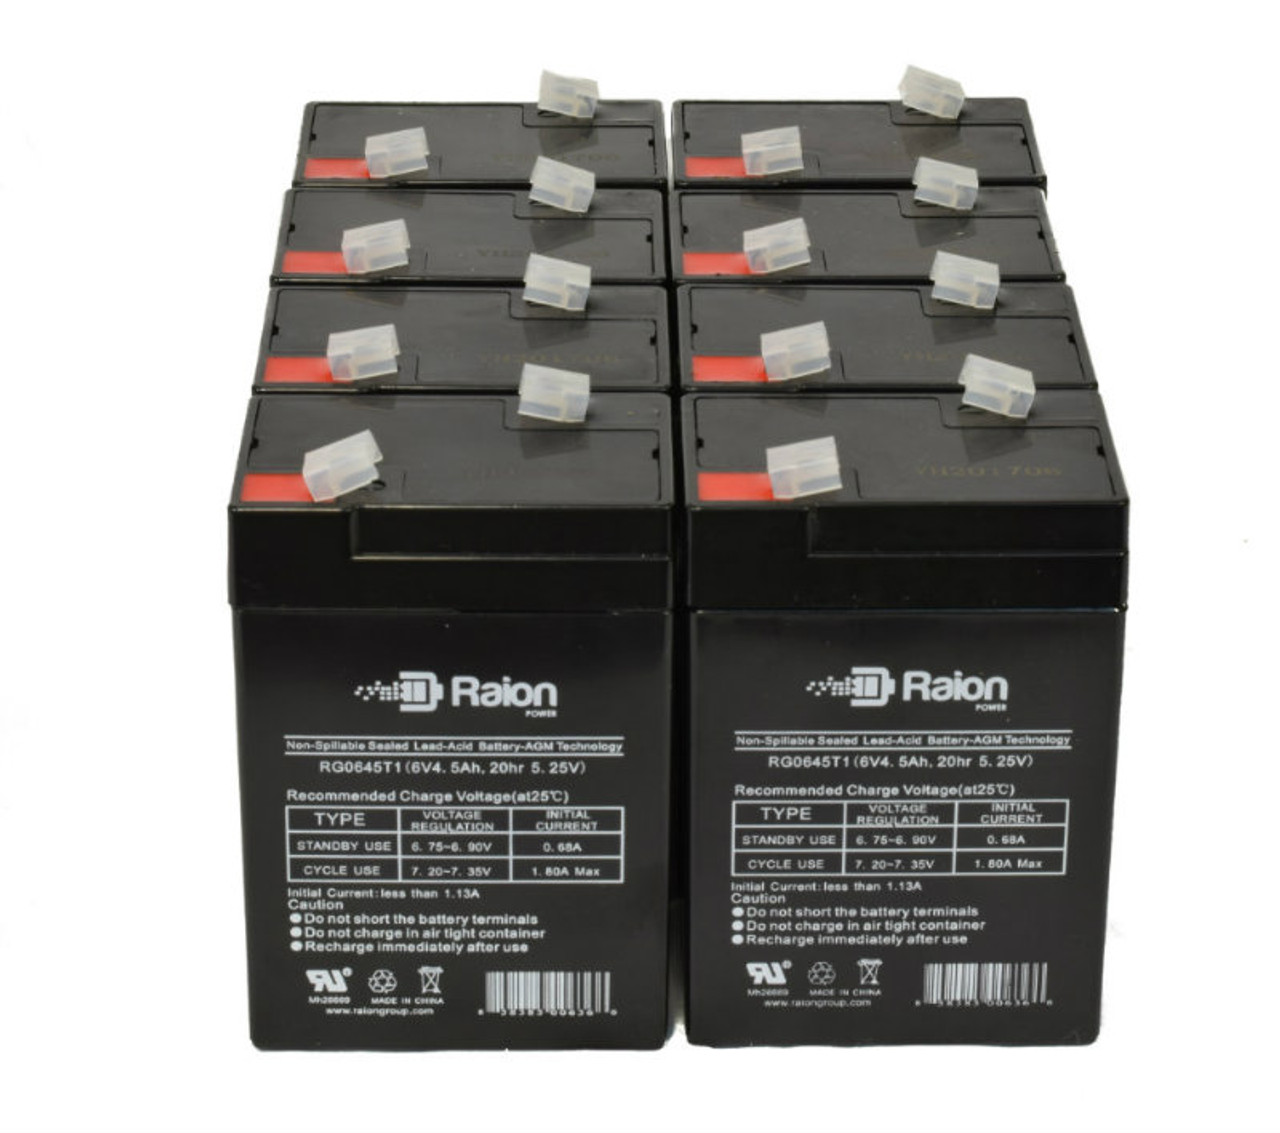 Raion Power 6 Volt 4.5Ah RG0645T1 Replacement Battery for Chilwee 3-FM-4 - 8 Pack